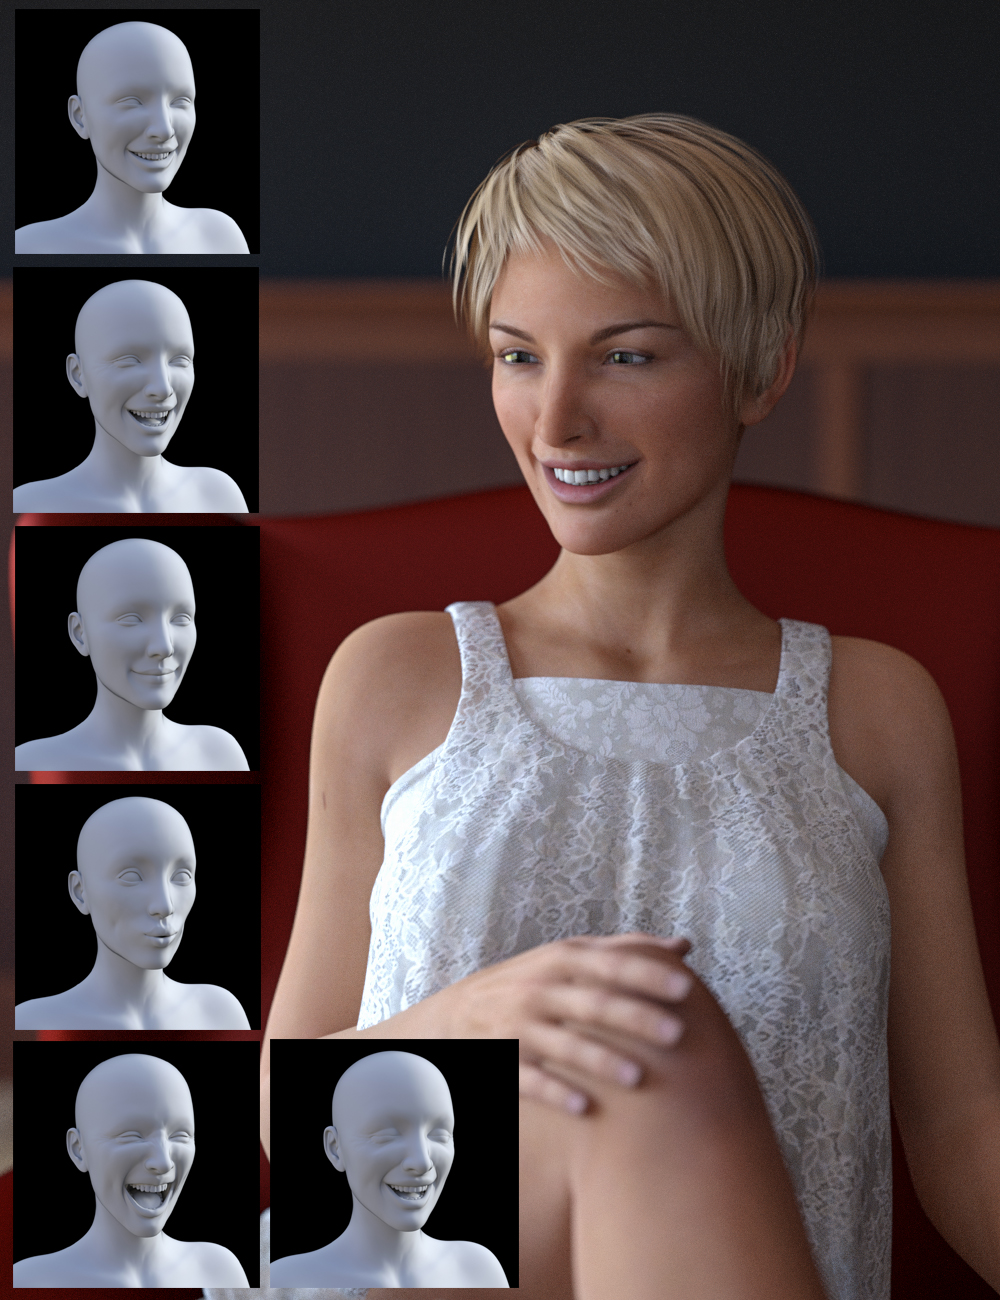 Biometric Expressions: Happiness and Joy! for Genesis 3 Female(s) by: Those Things, 3D Models by Daz 3D